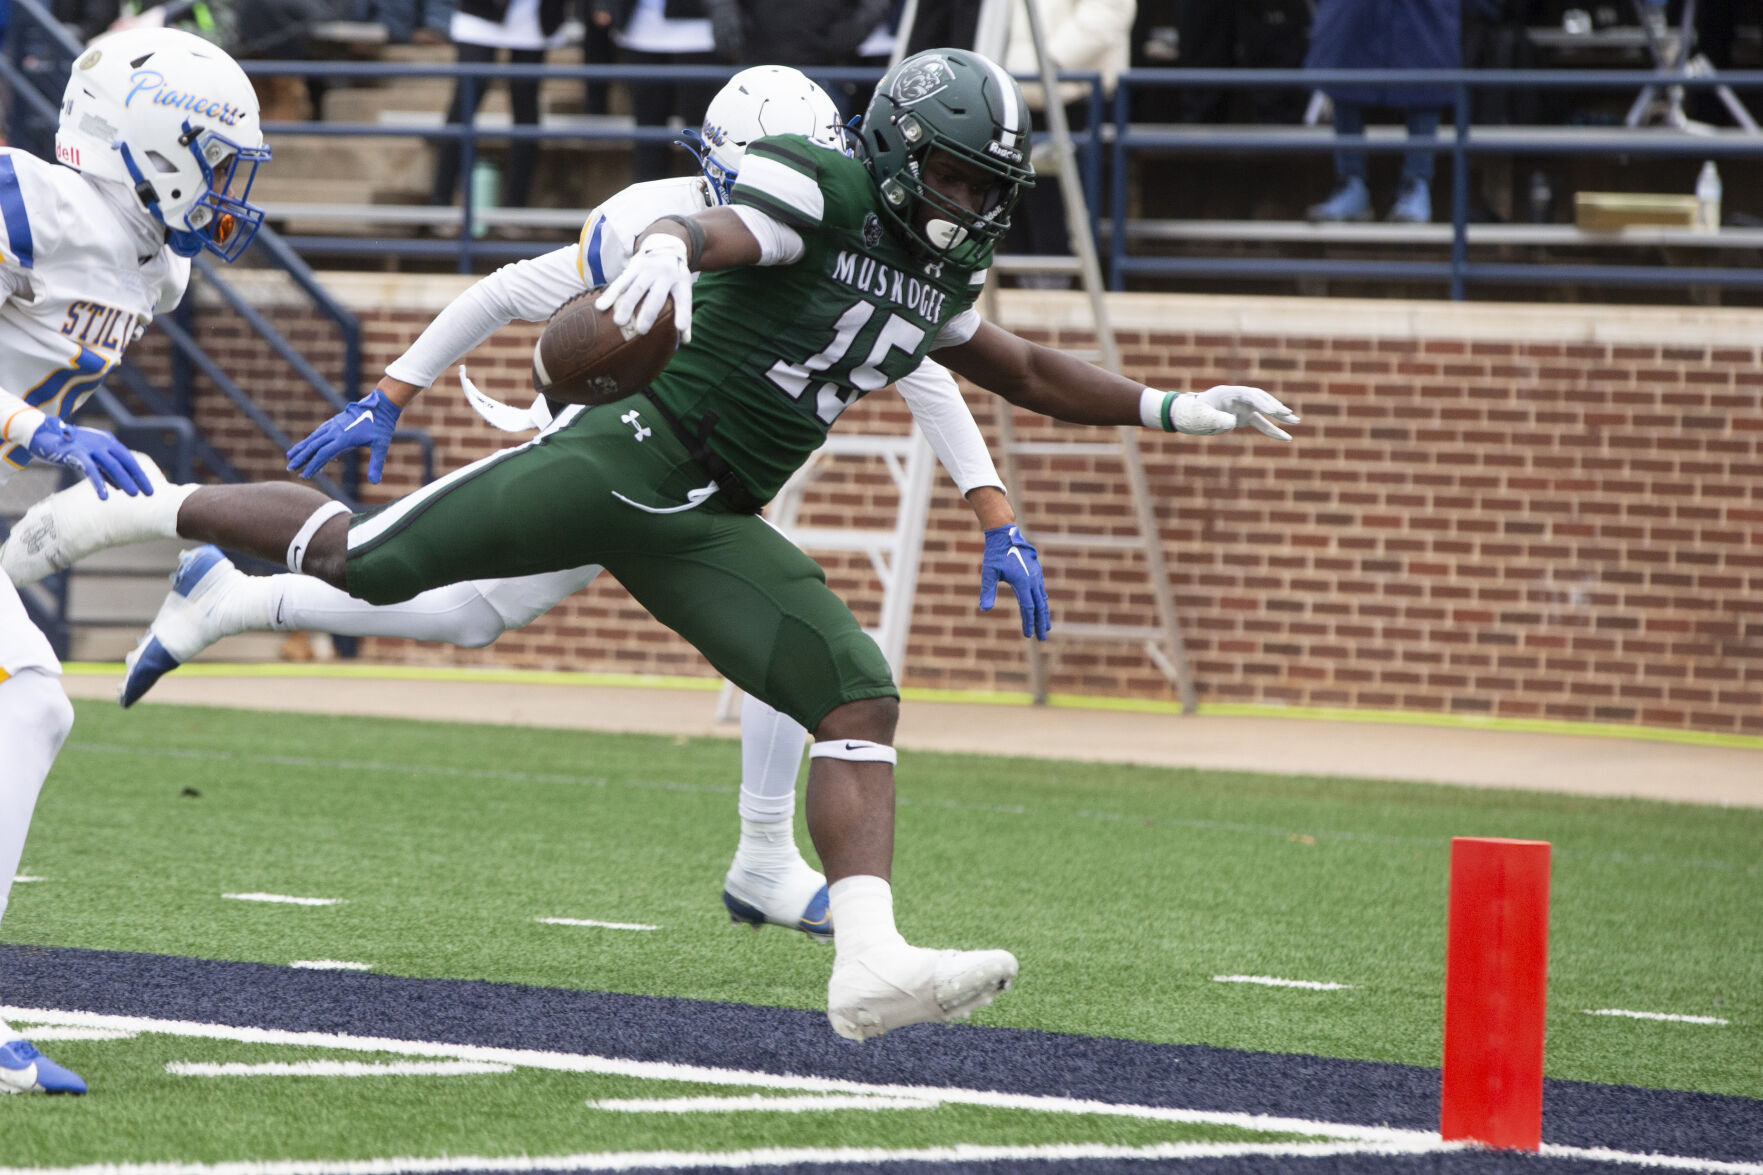 Muskogee High School Wins 10th State Championship with 28-26 Victory Over Stillwater